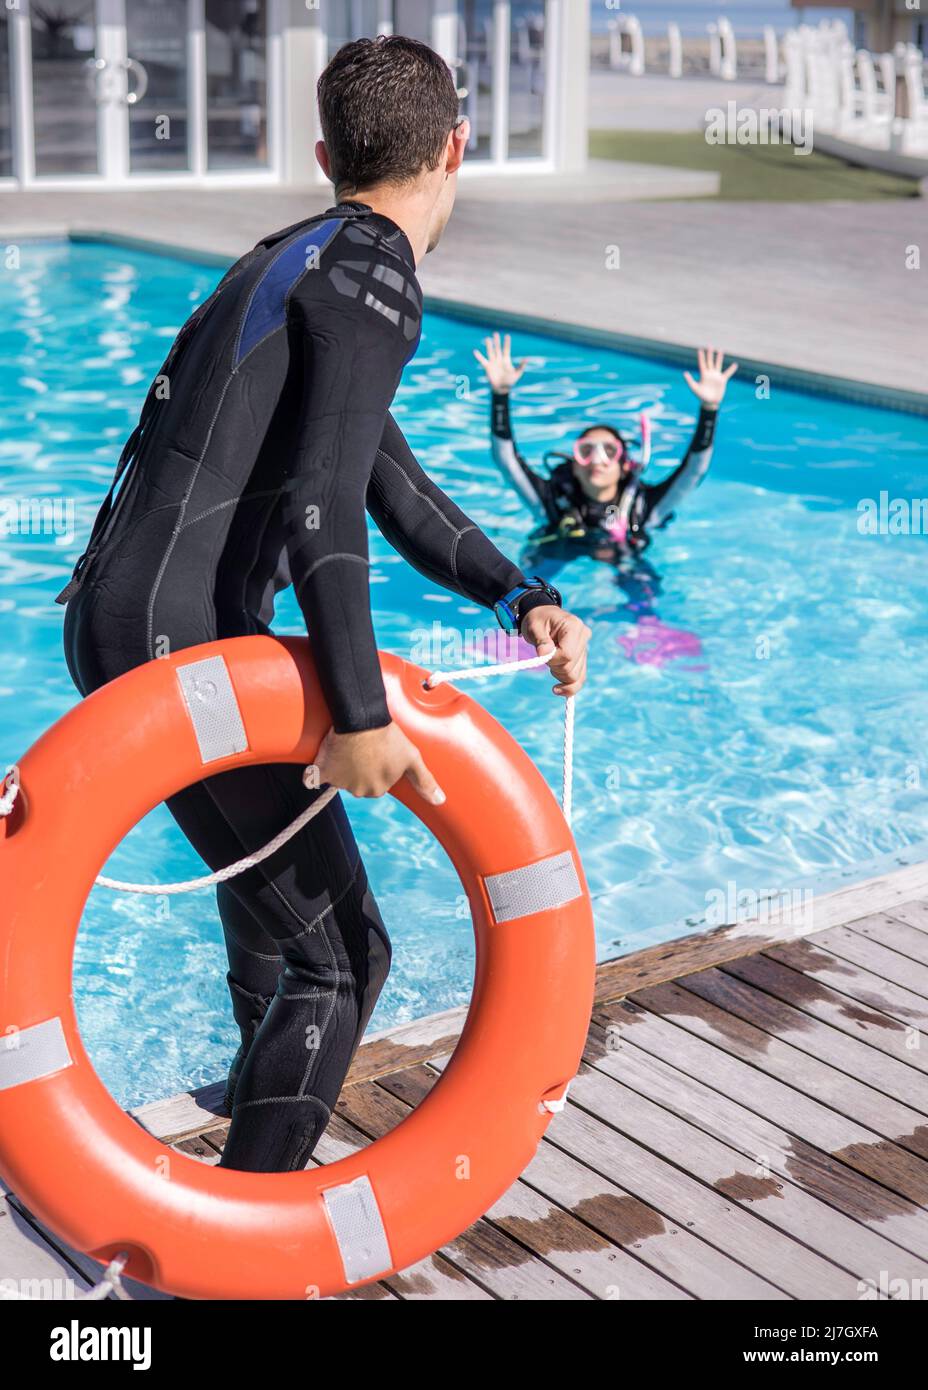 Scuba Diving rescue course skills distressed diver signal with lifeline being thrown to her Stock Photo